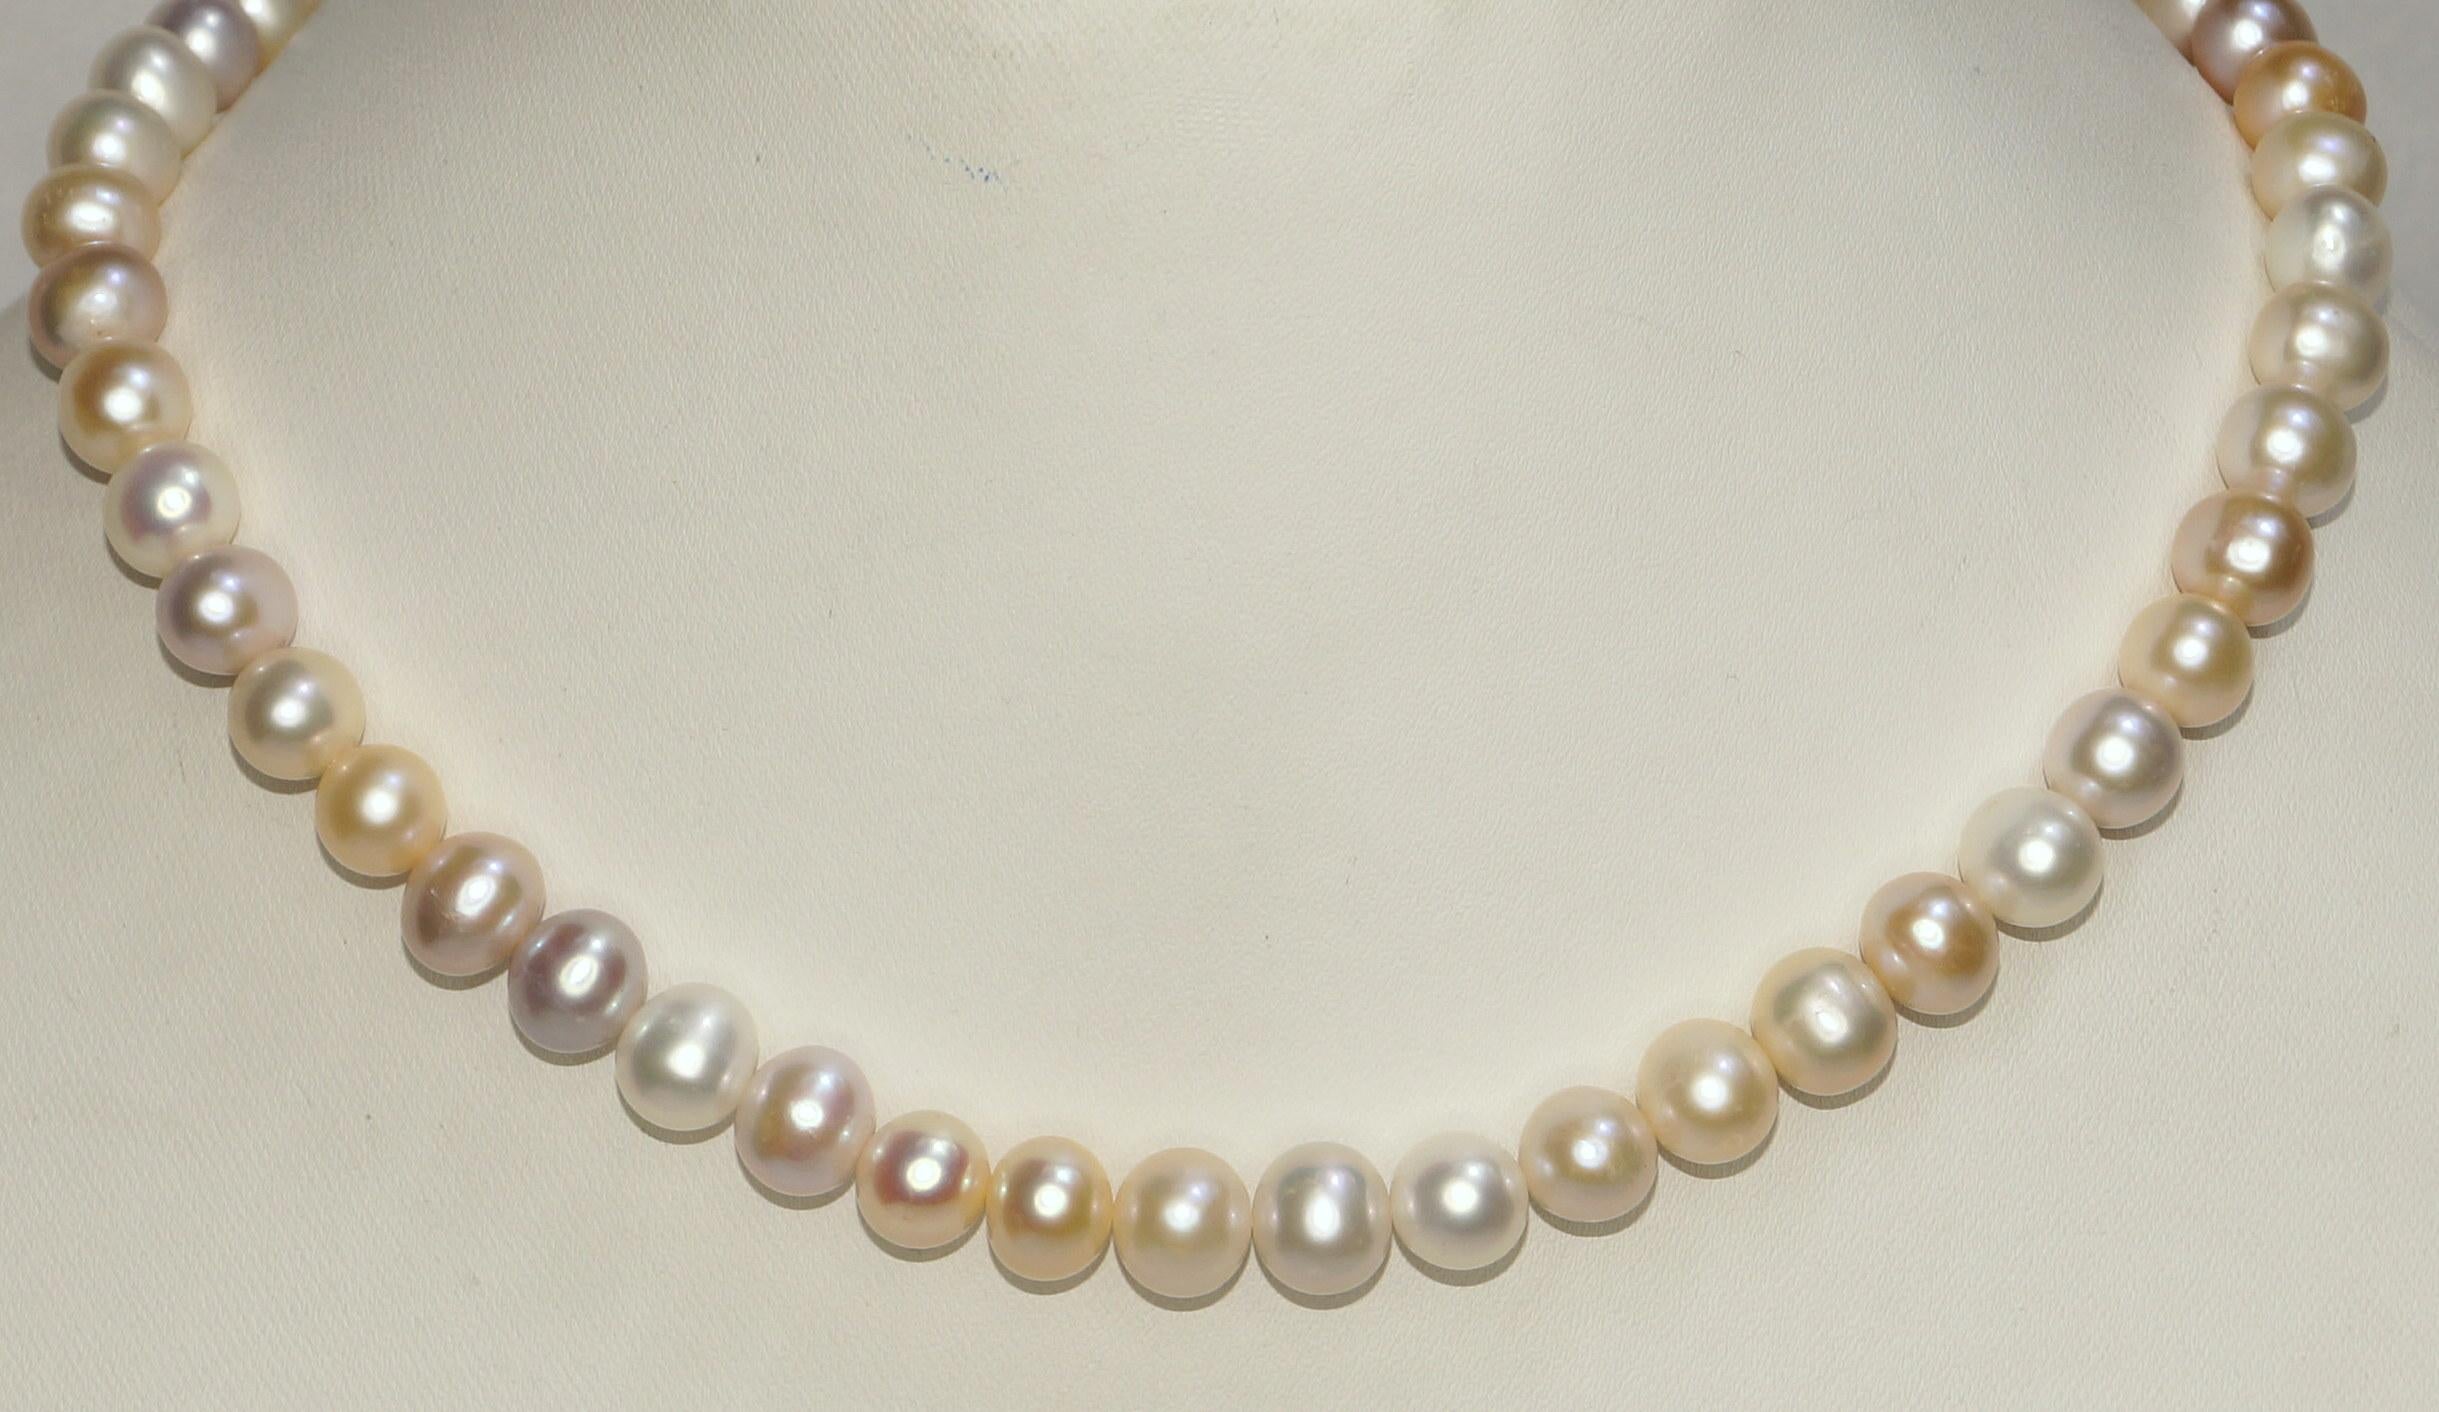 Victorian 14k Gold Golden Cream mix Pearl necklace 14mm Freshwater Round Pearl necklace